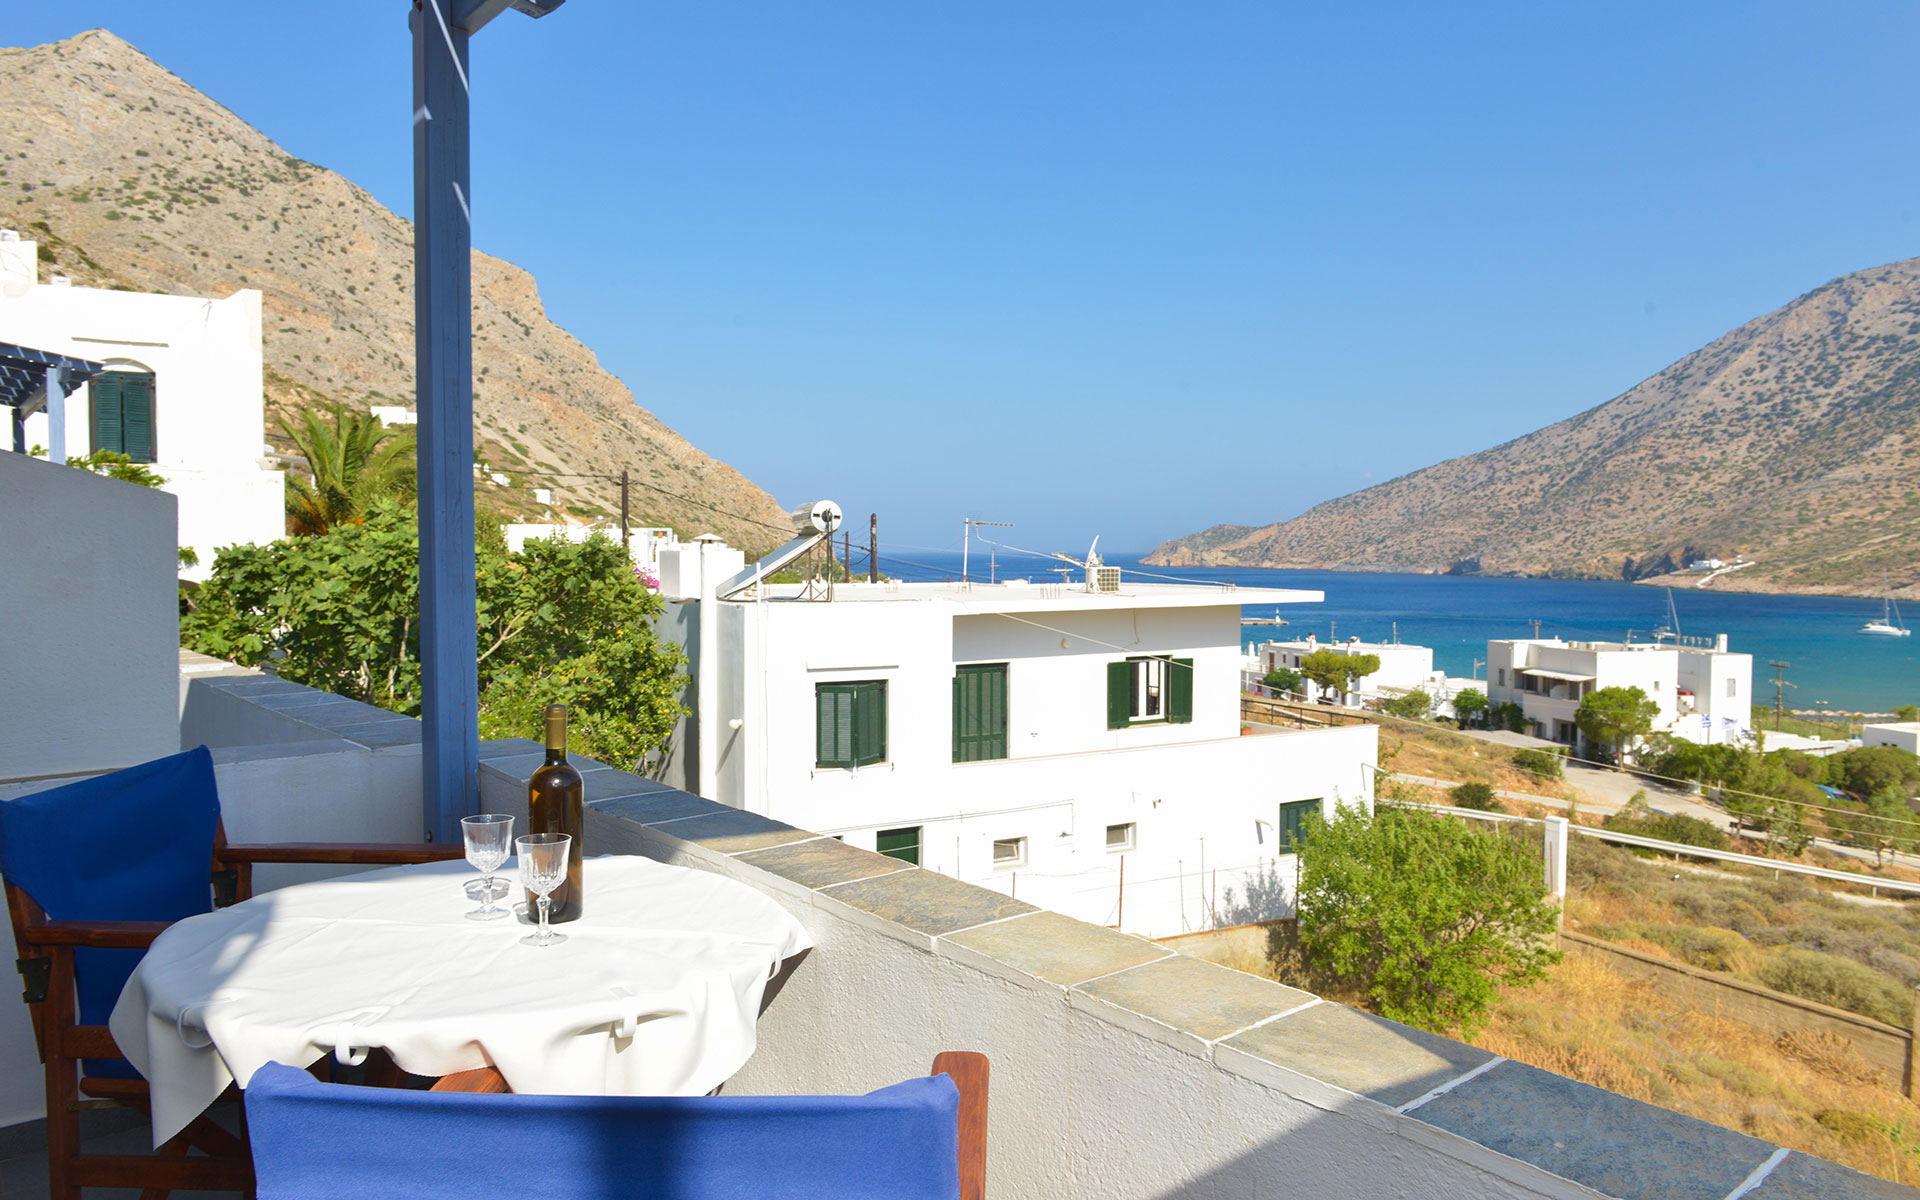 Apartments with views in Kamares Sifnos